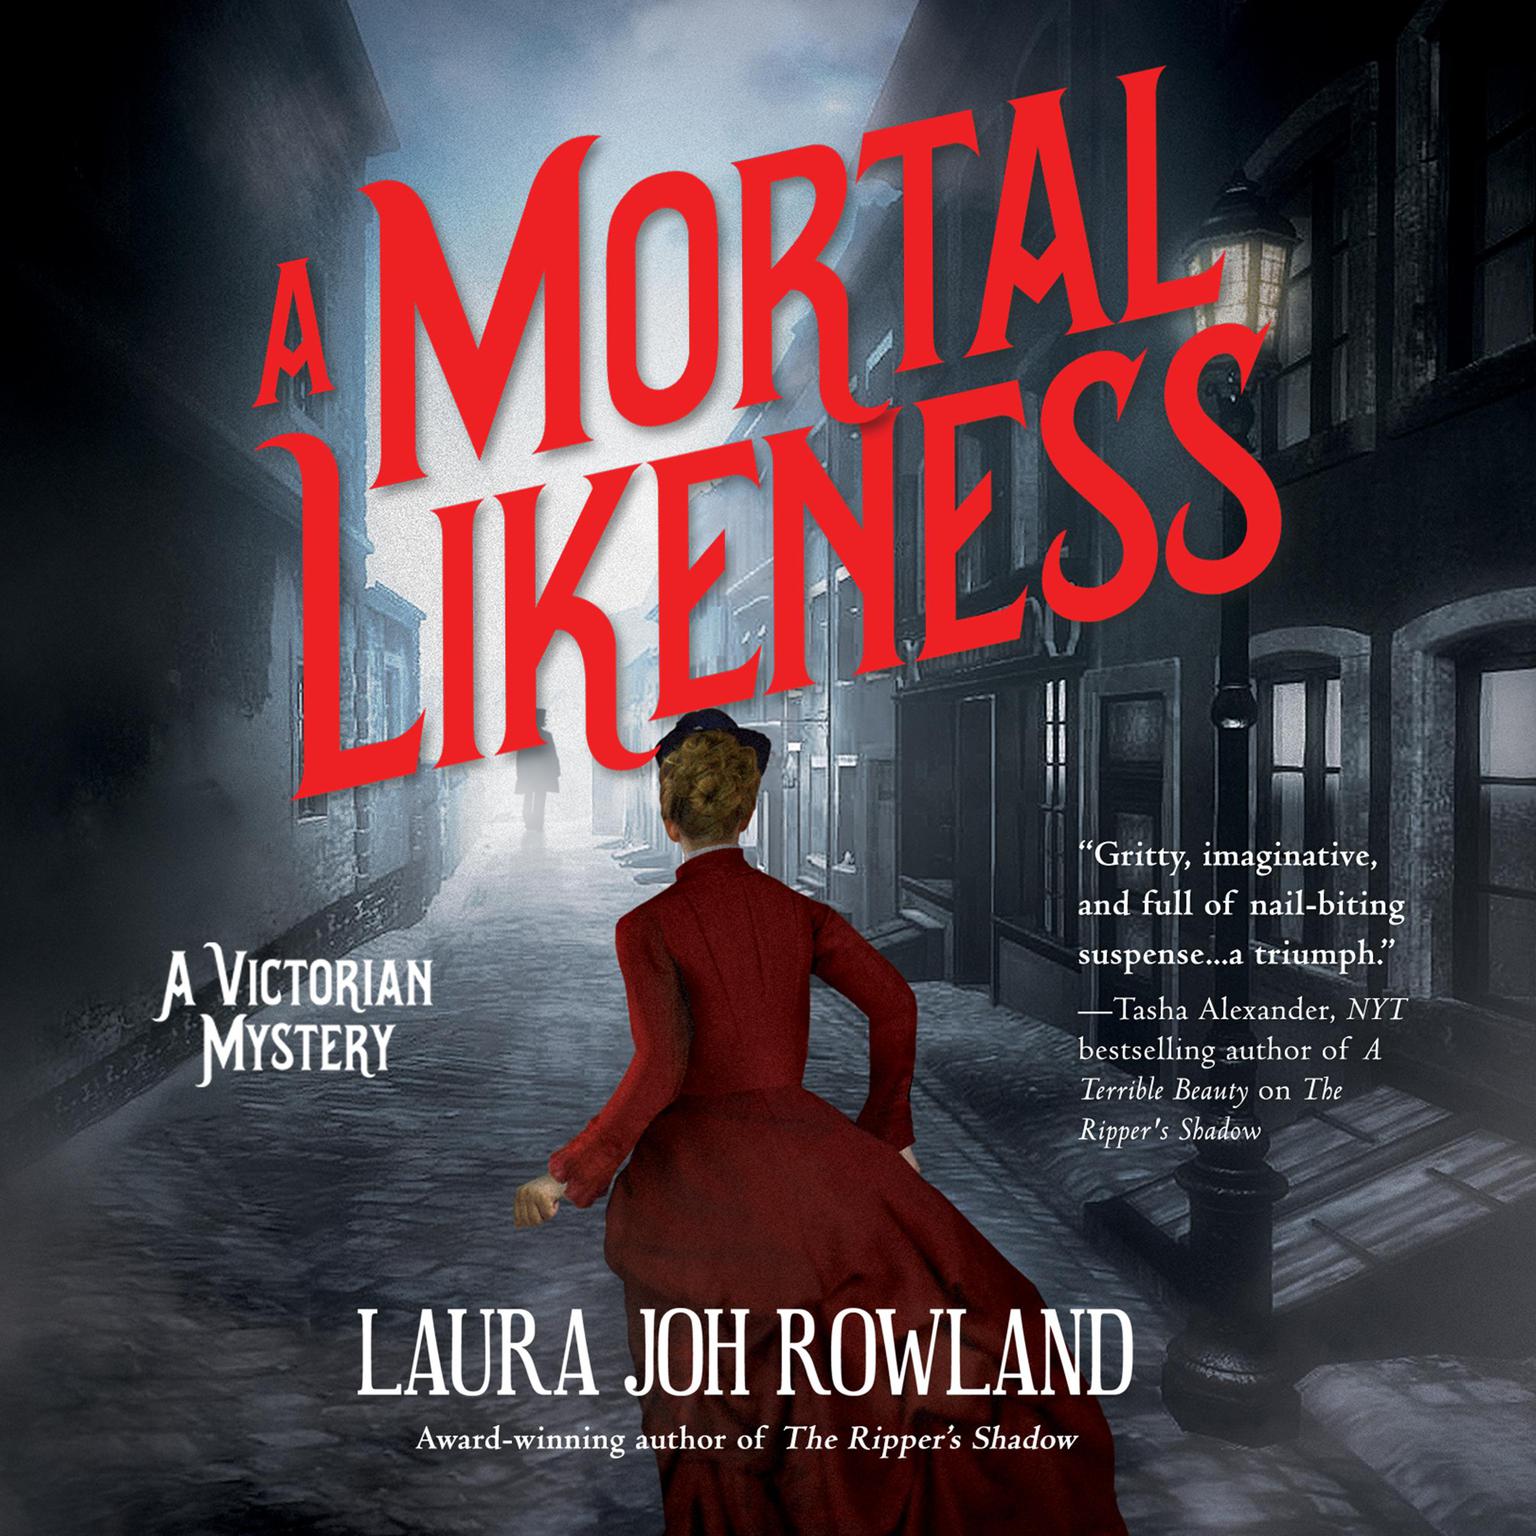 A Mortal Likeness: A Victorian Mystery Audiobook, by Laura Joh Rowland